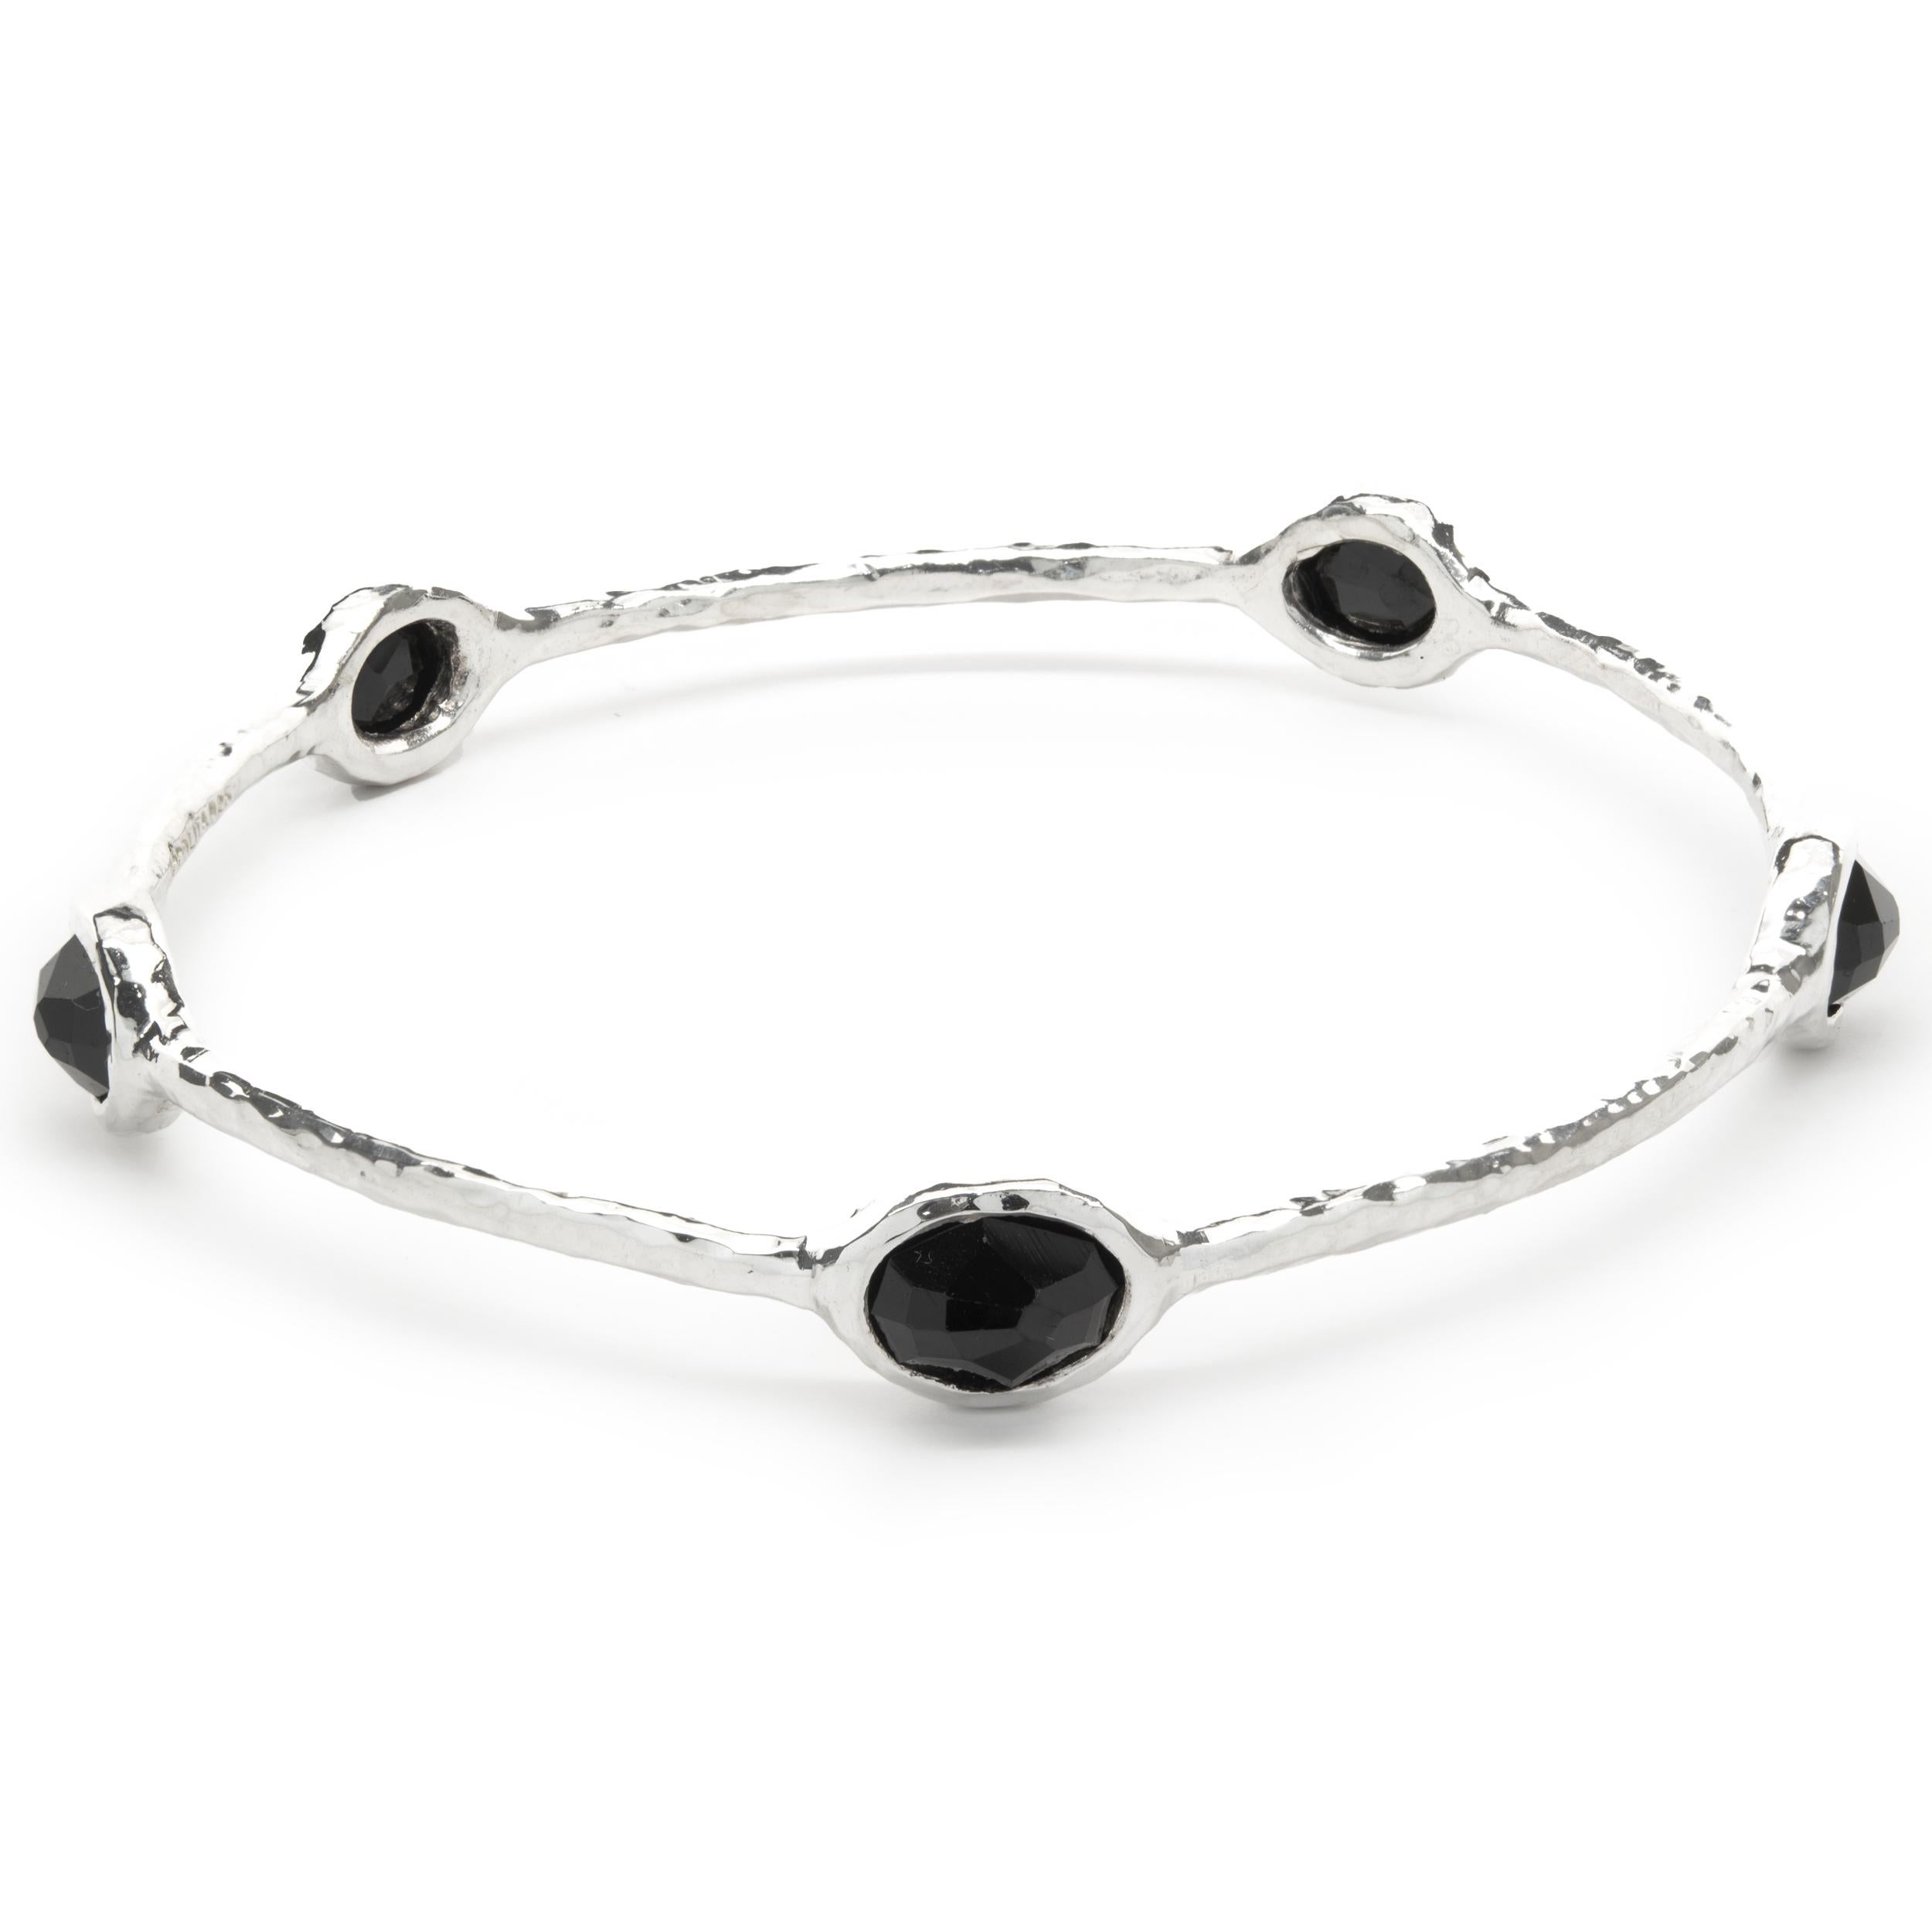 Designer: Ippolita
Material: sterling silver
Weight: 13.32 grams
Dimensions: bracelet will fit up to a 7-inch wrist